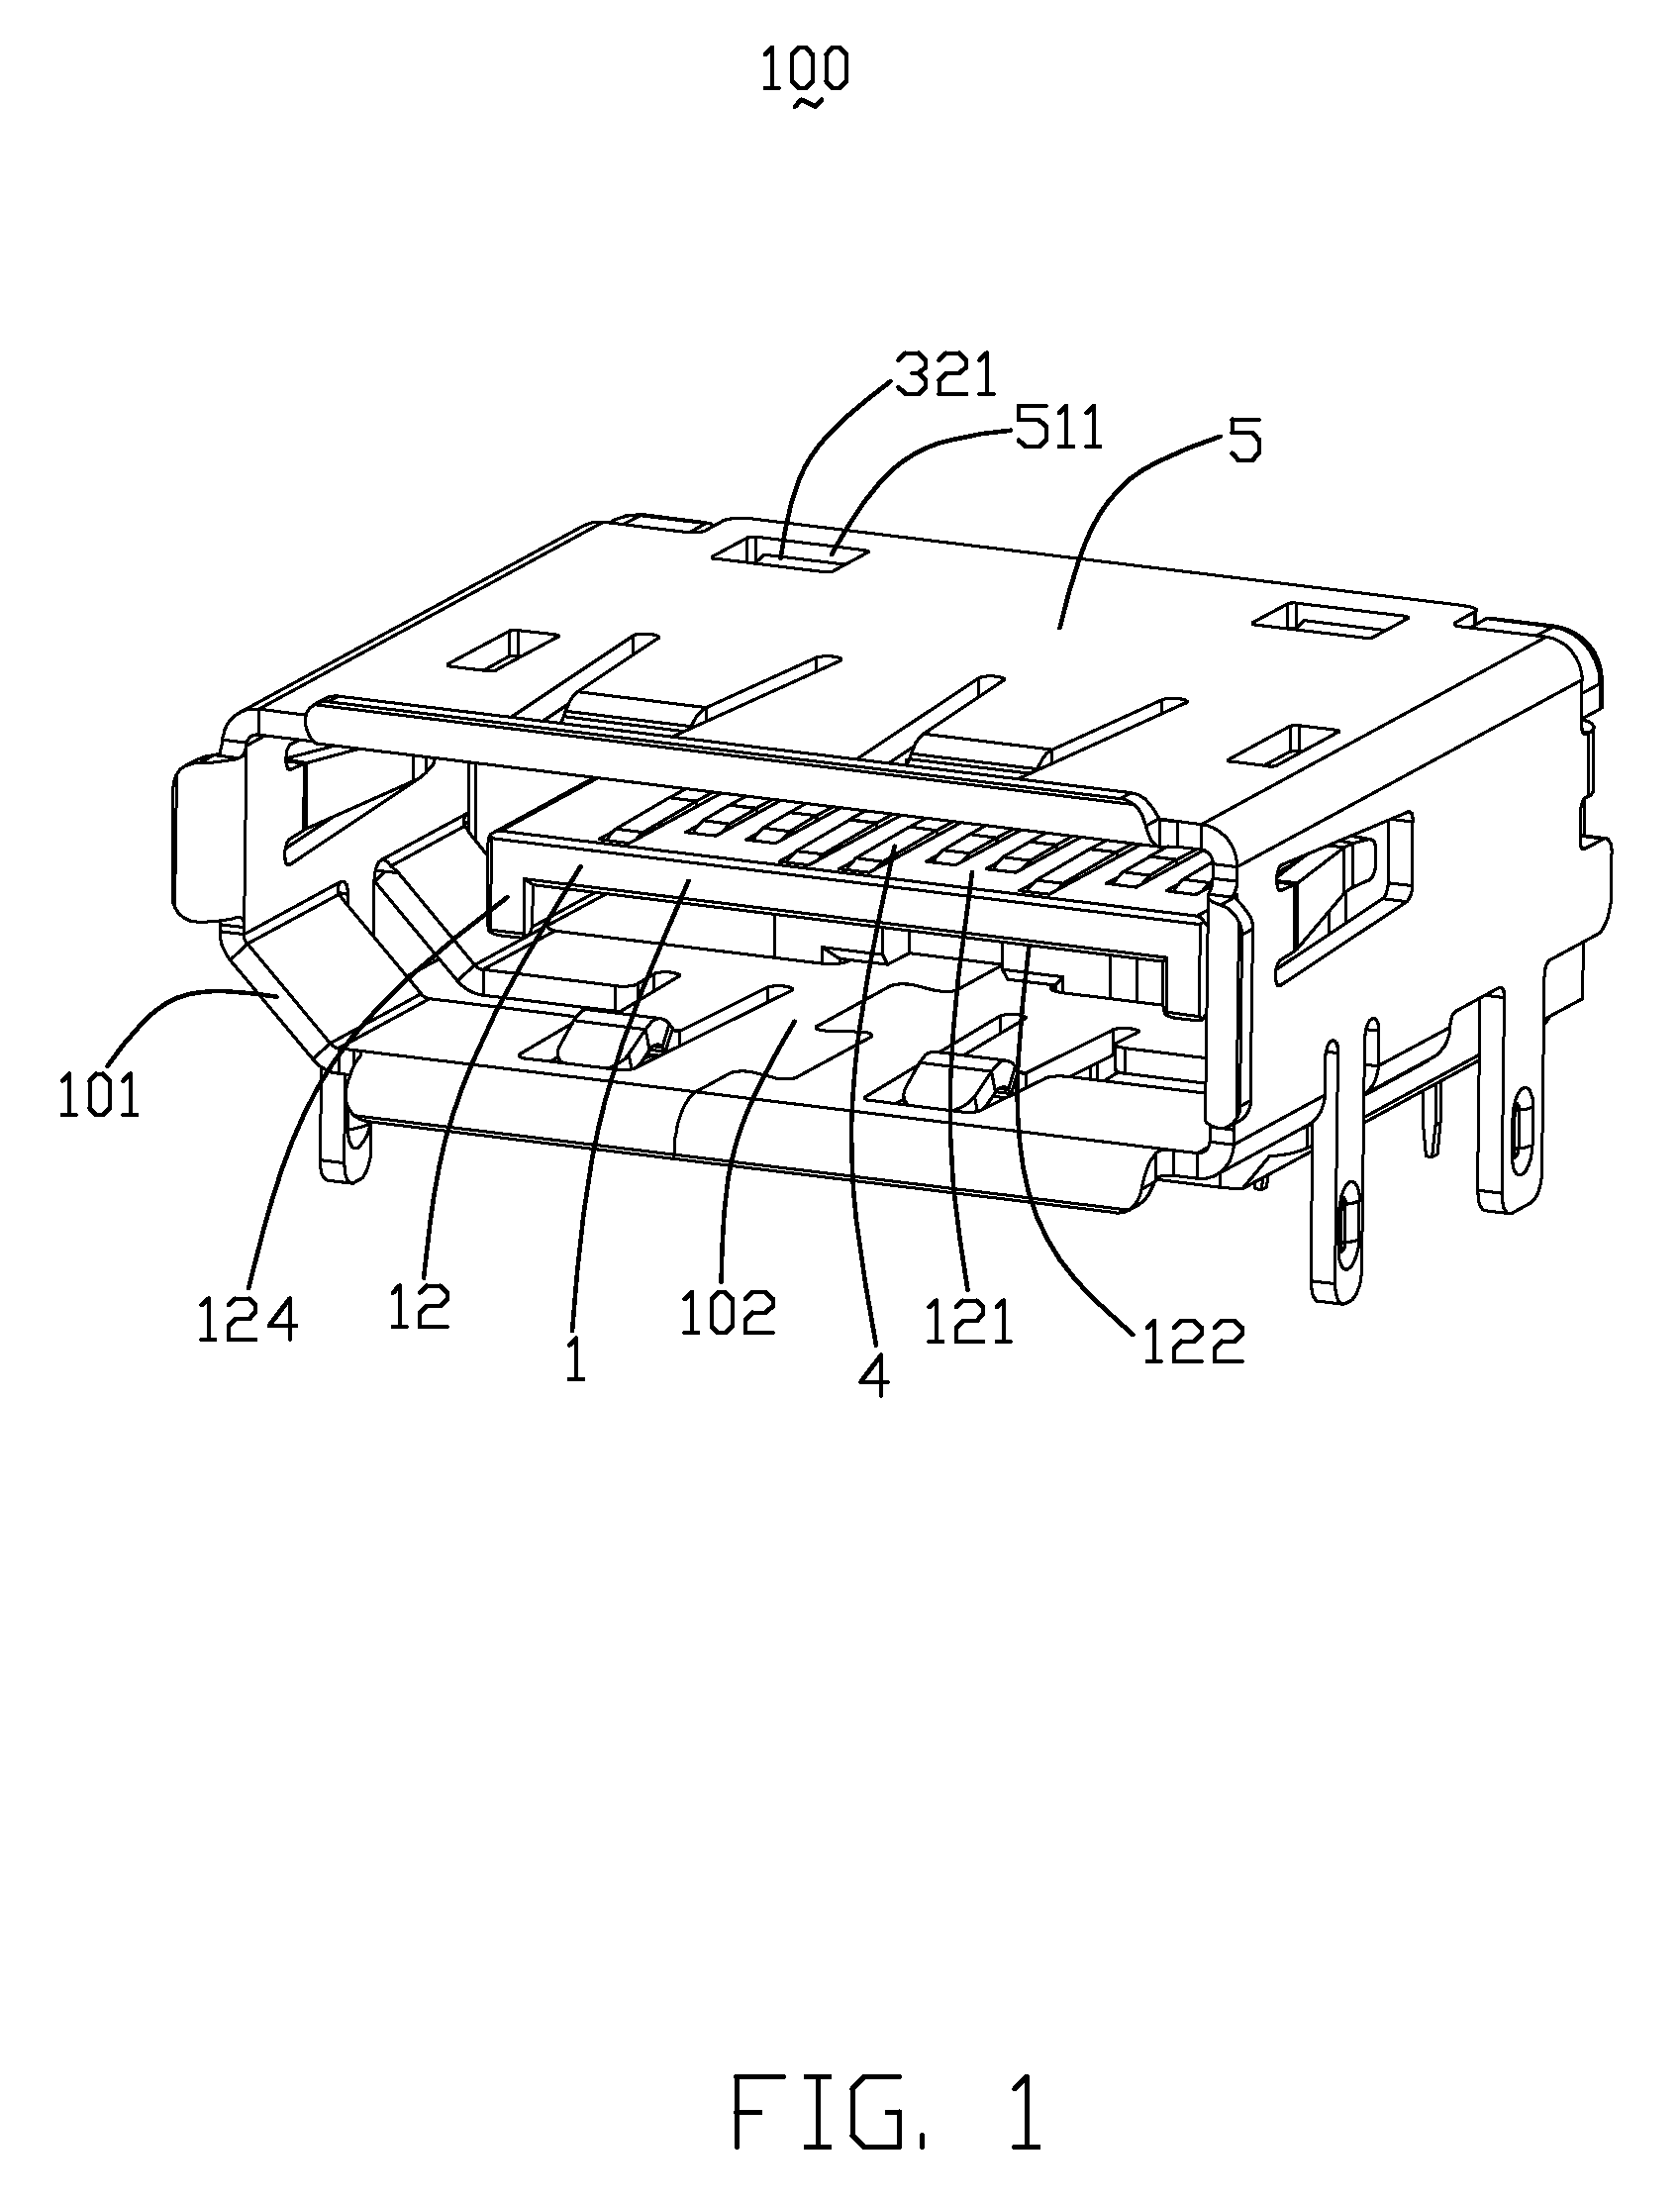 Electrical connector with improved contact structure